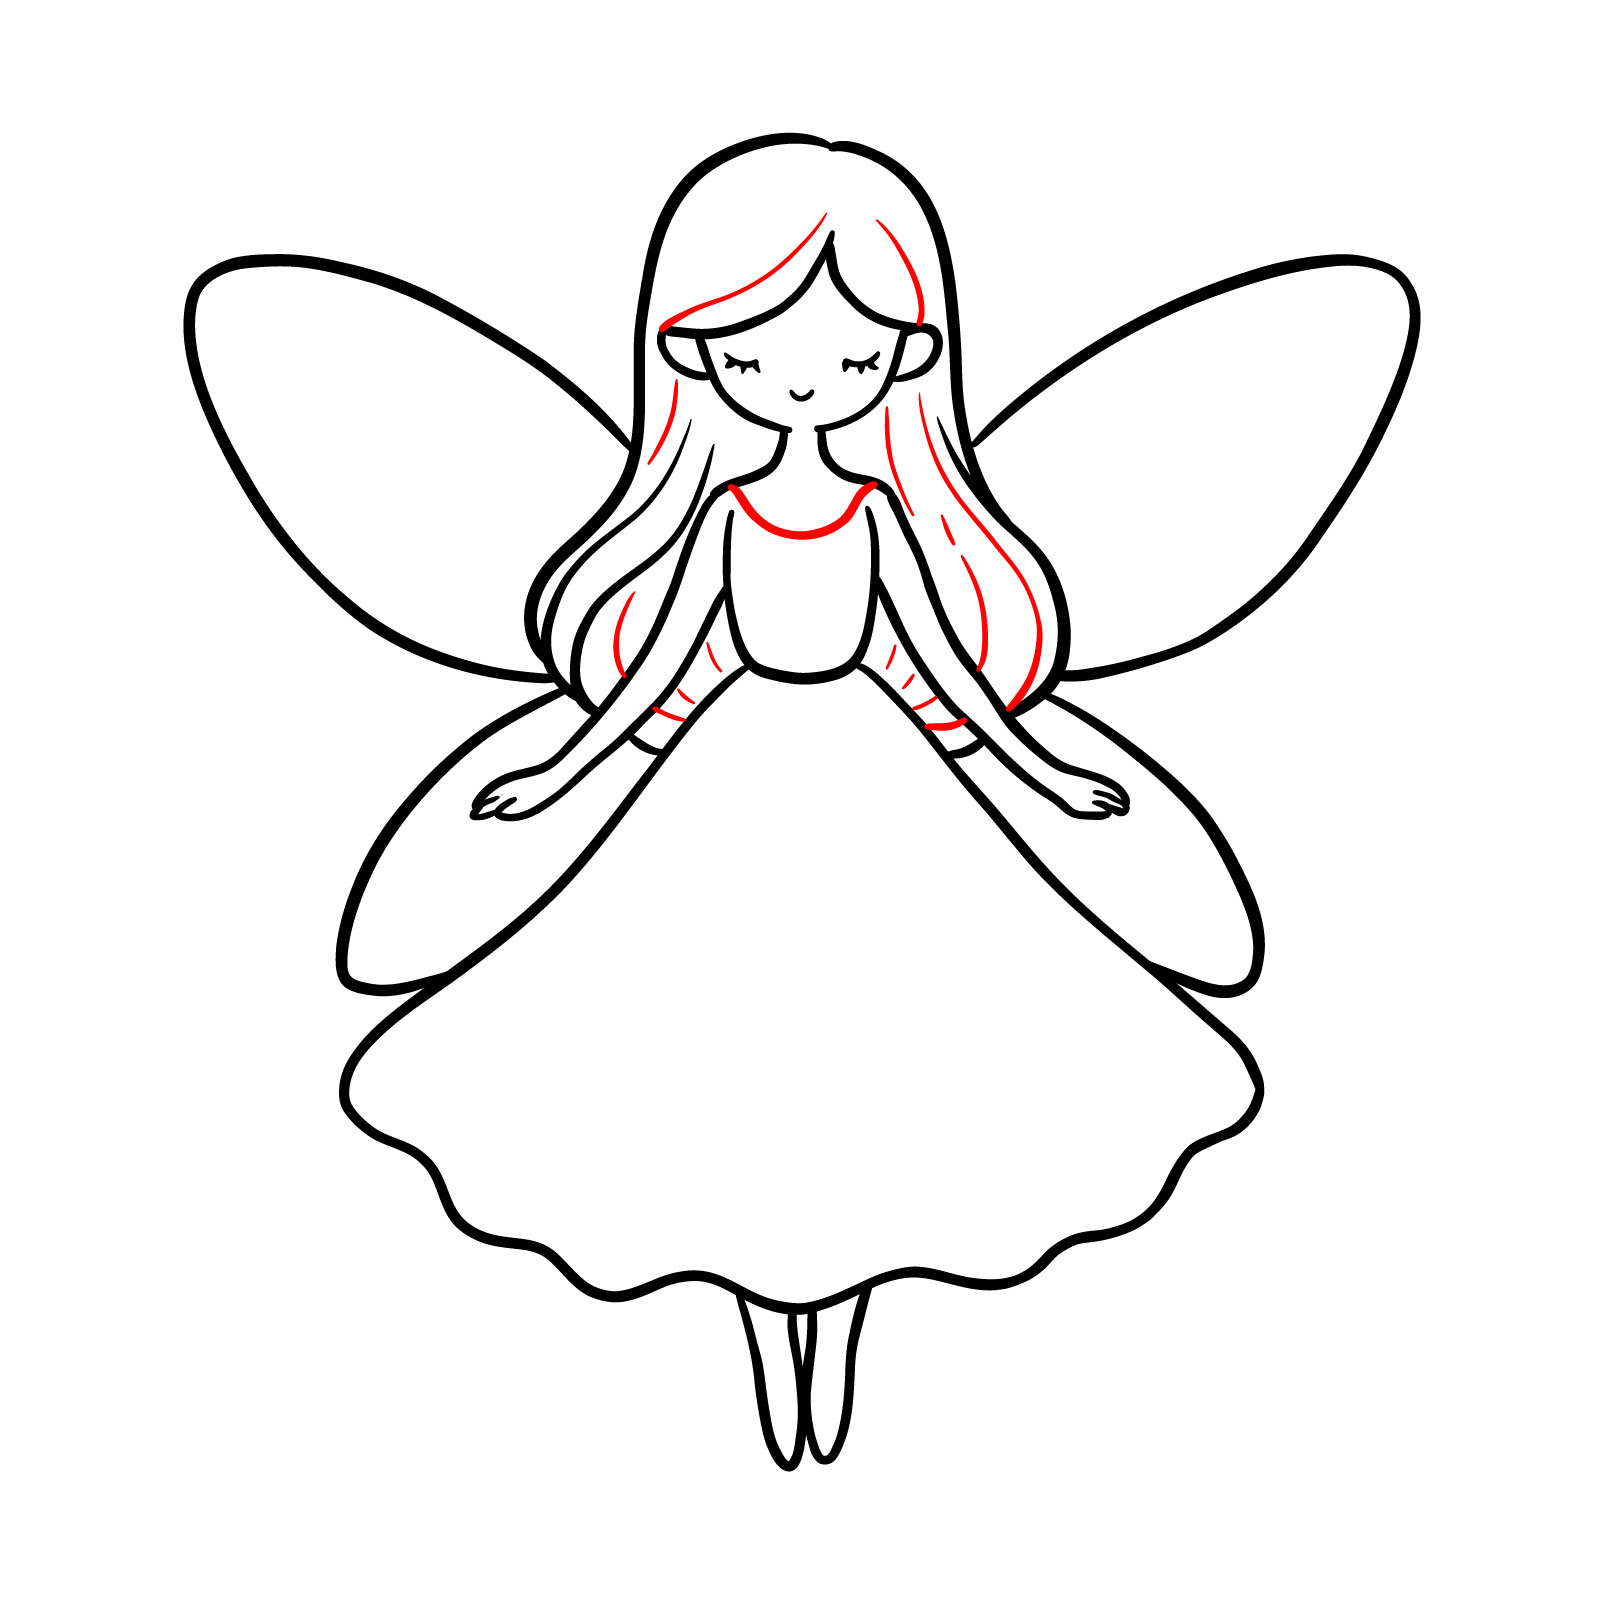 Drawing the fairy - enhancing the hair and adding a collar to the fairy's dress - step 10